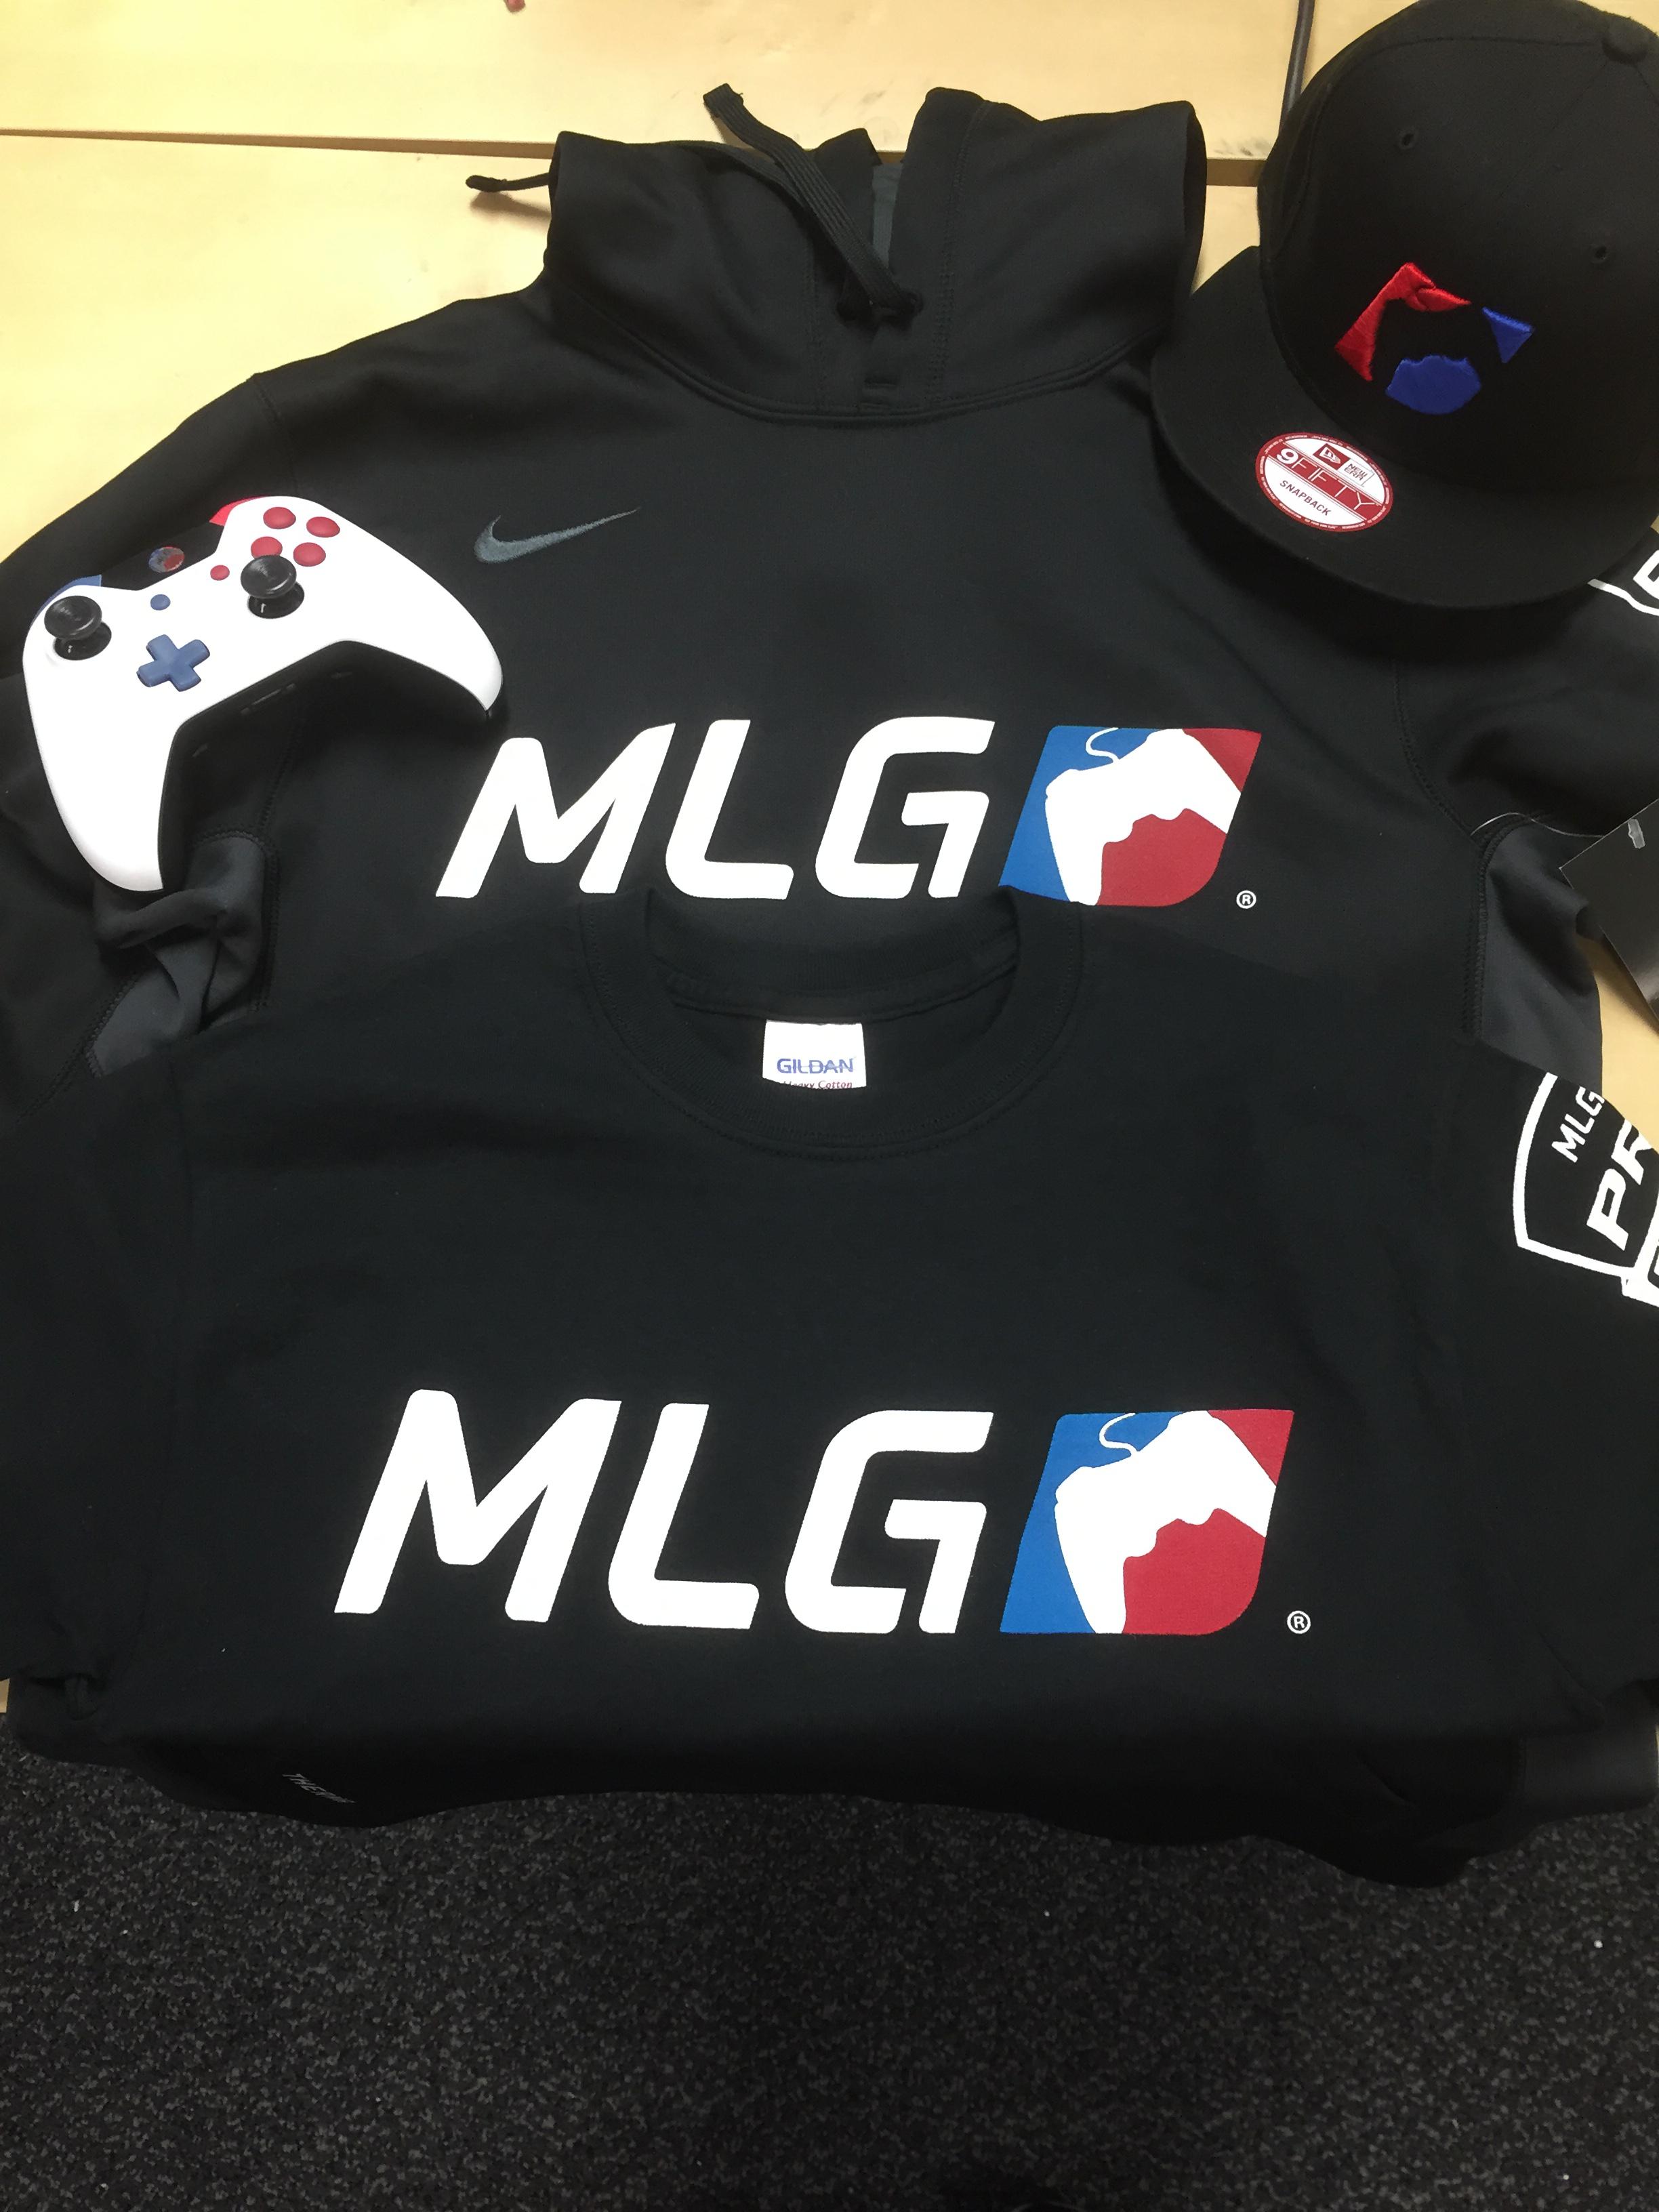 MLG Twitter: "#MLGCarePackage (Pro Tip: You may want to be http://t.co/vCEdoYR8nK tonight) Stay http://t.co/0IyFWQW435" / Twitter